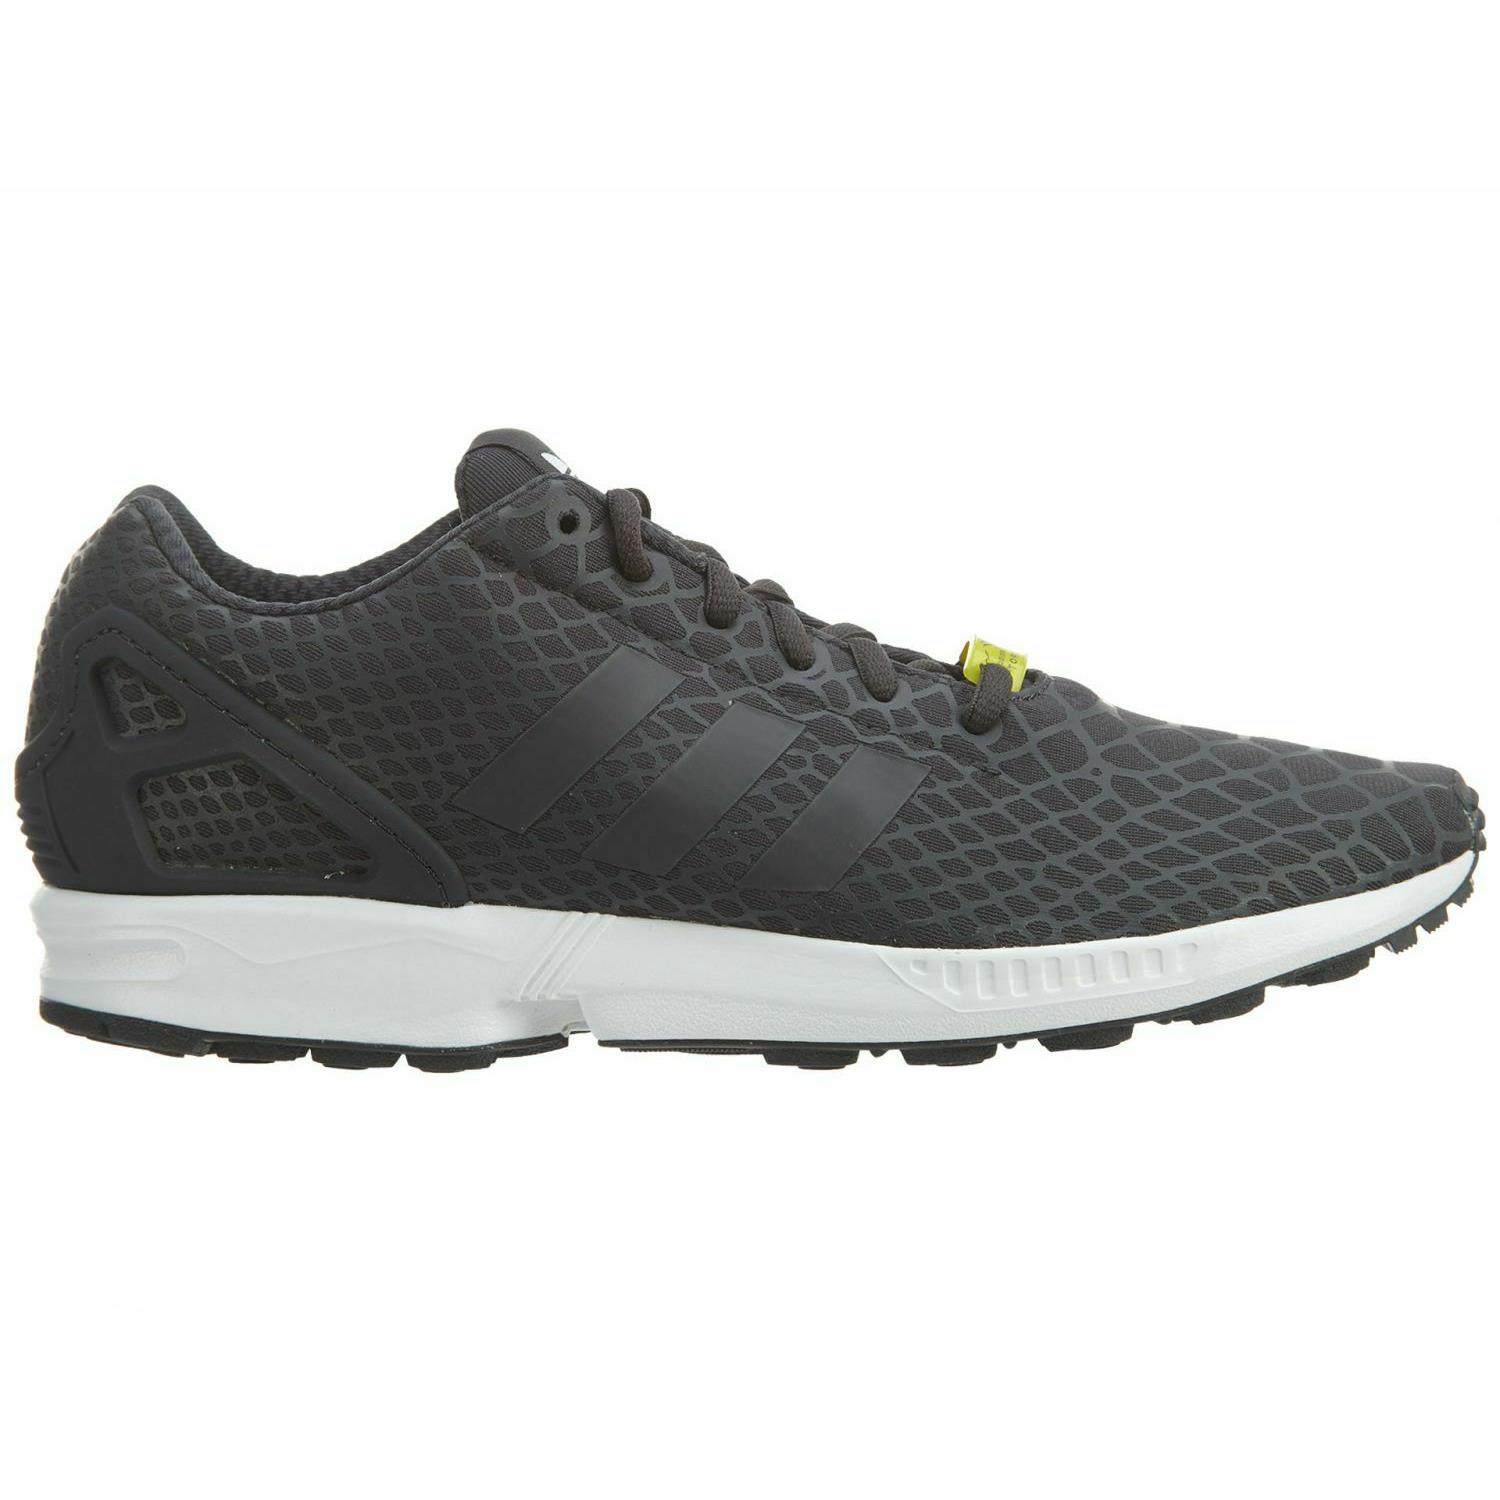 Adidas ZX Flux Techfit Mens S75488 Shadow Black White Running Shoes Size 8.5 - Shadow Black/White